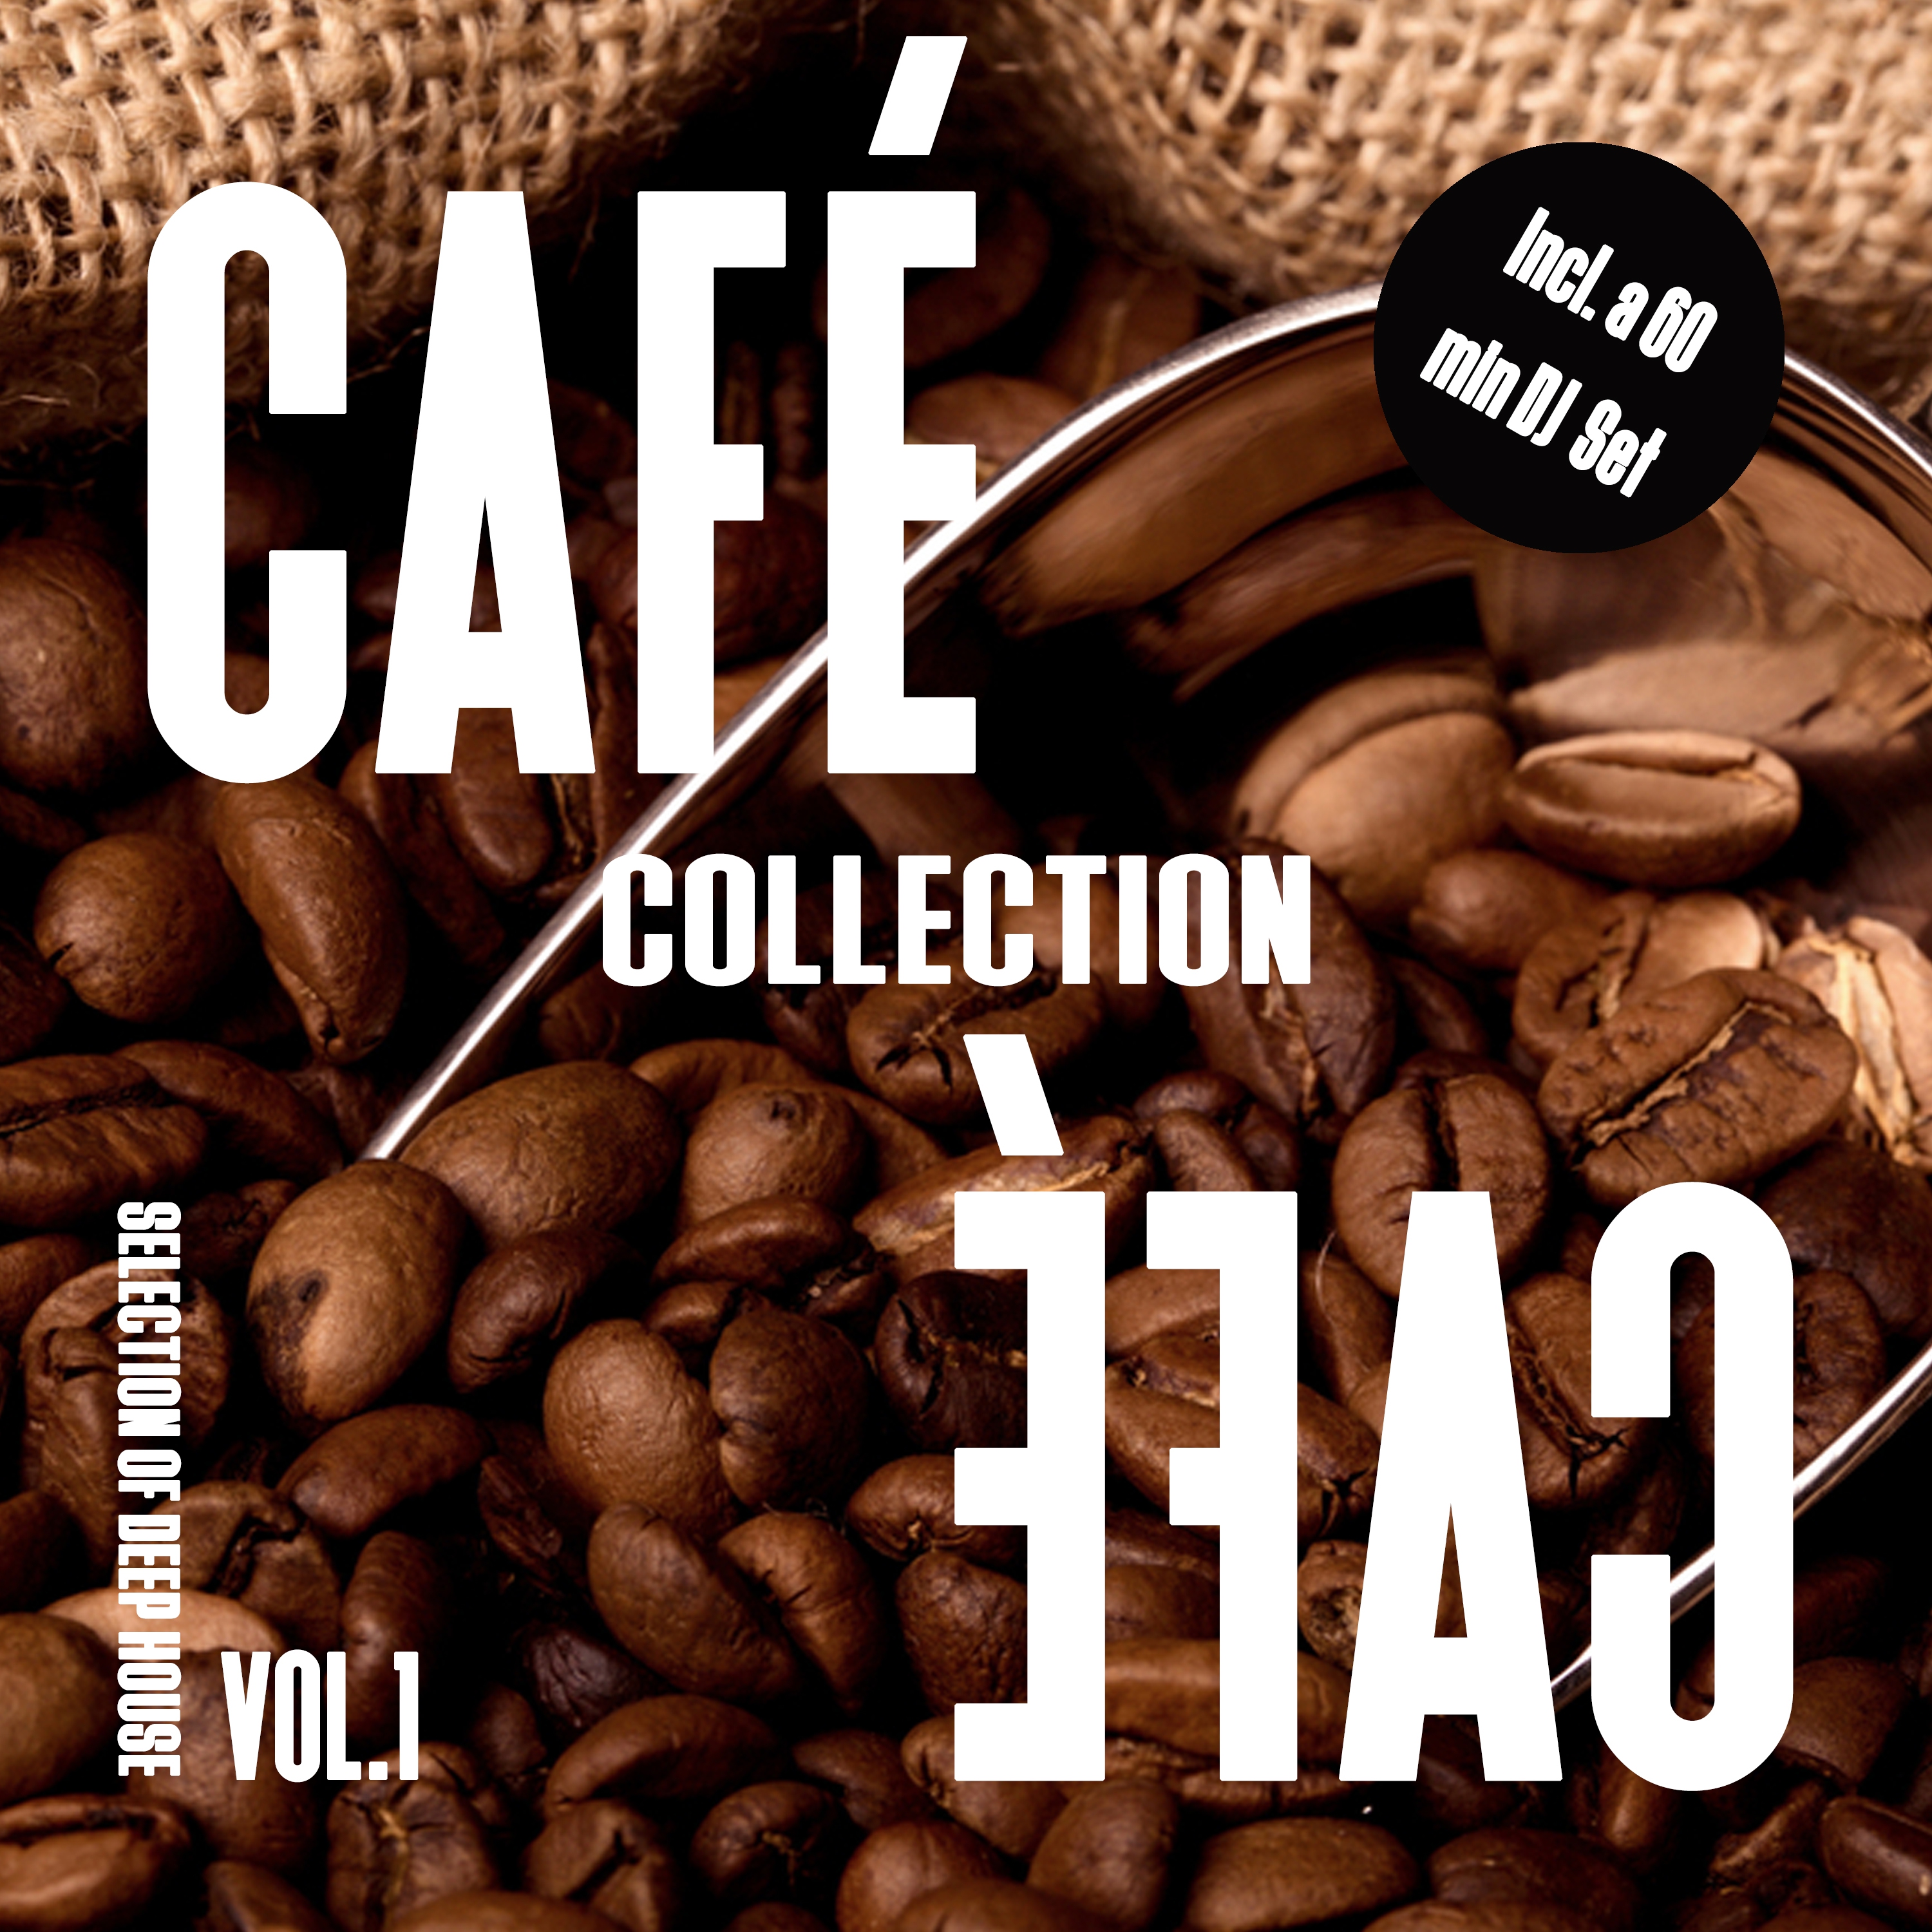 Cafe Cafe Collection, Vol. 1 - Selection of Deep House